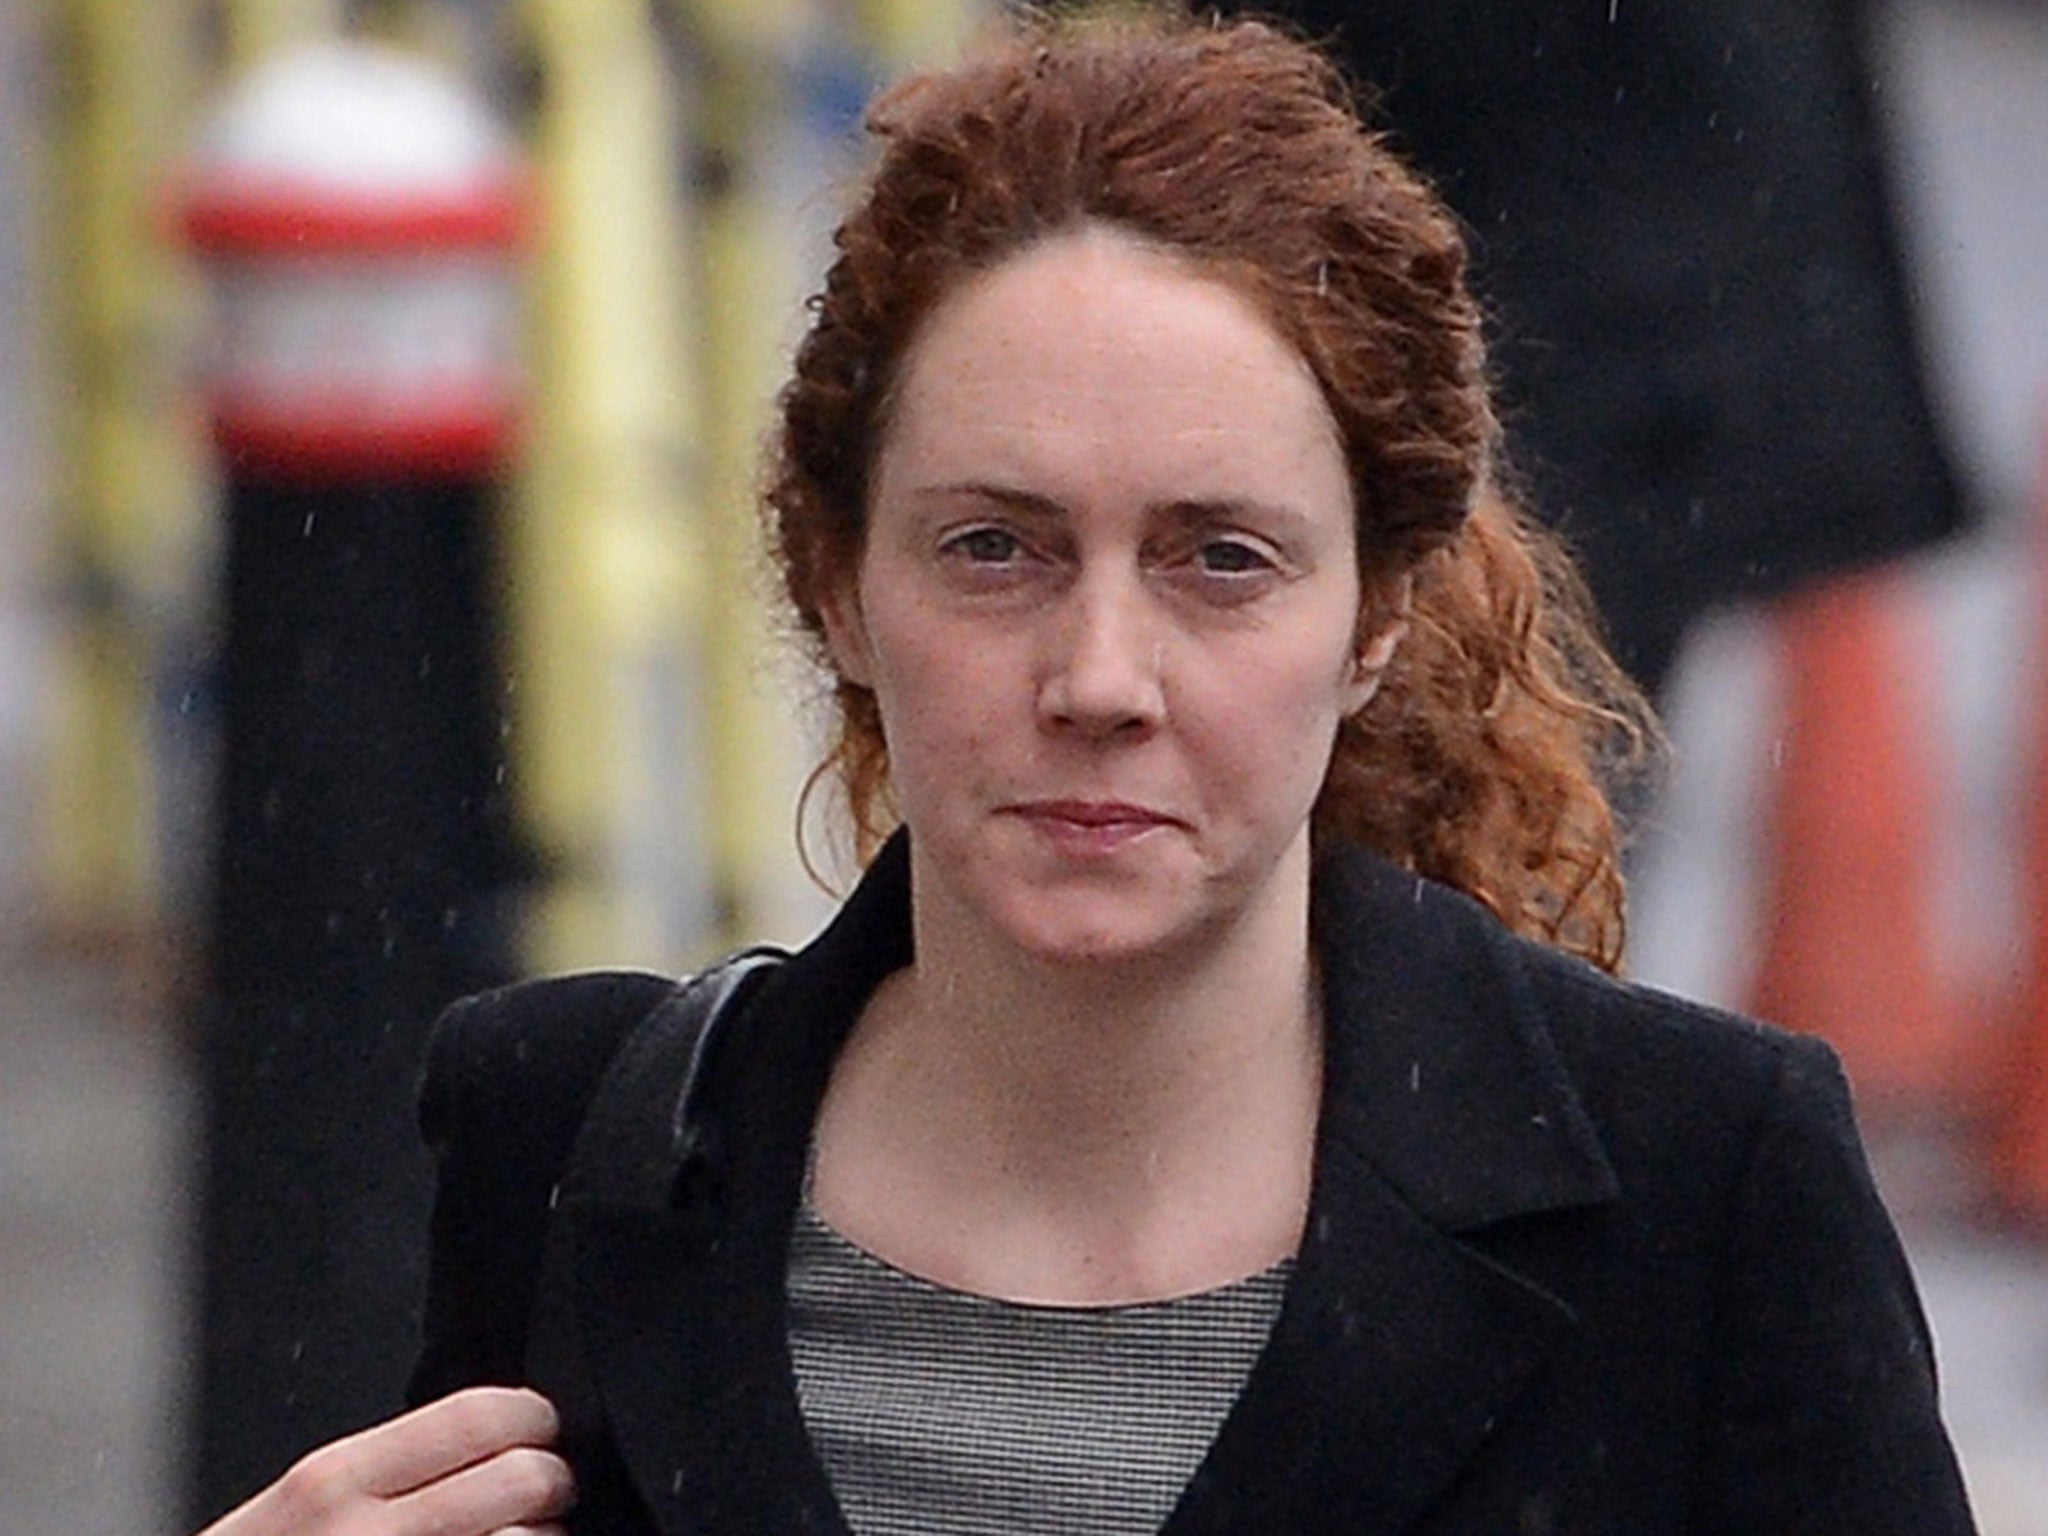 Rebekah Brooks: The former newspaper editor had security protection